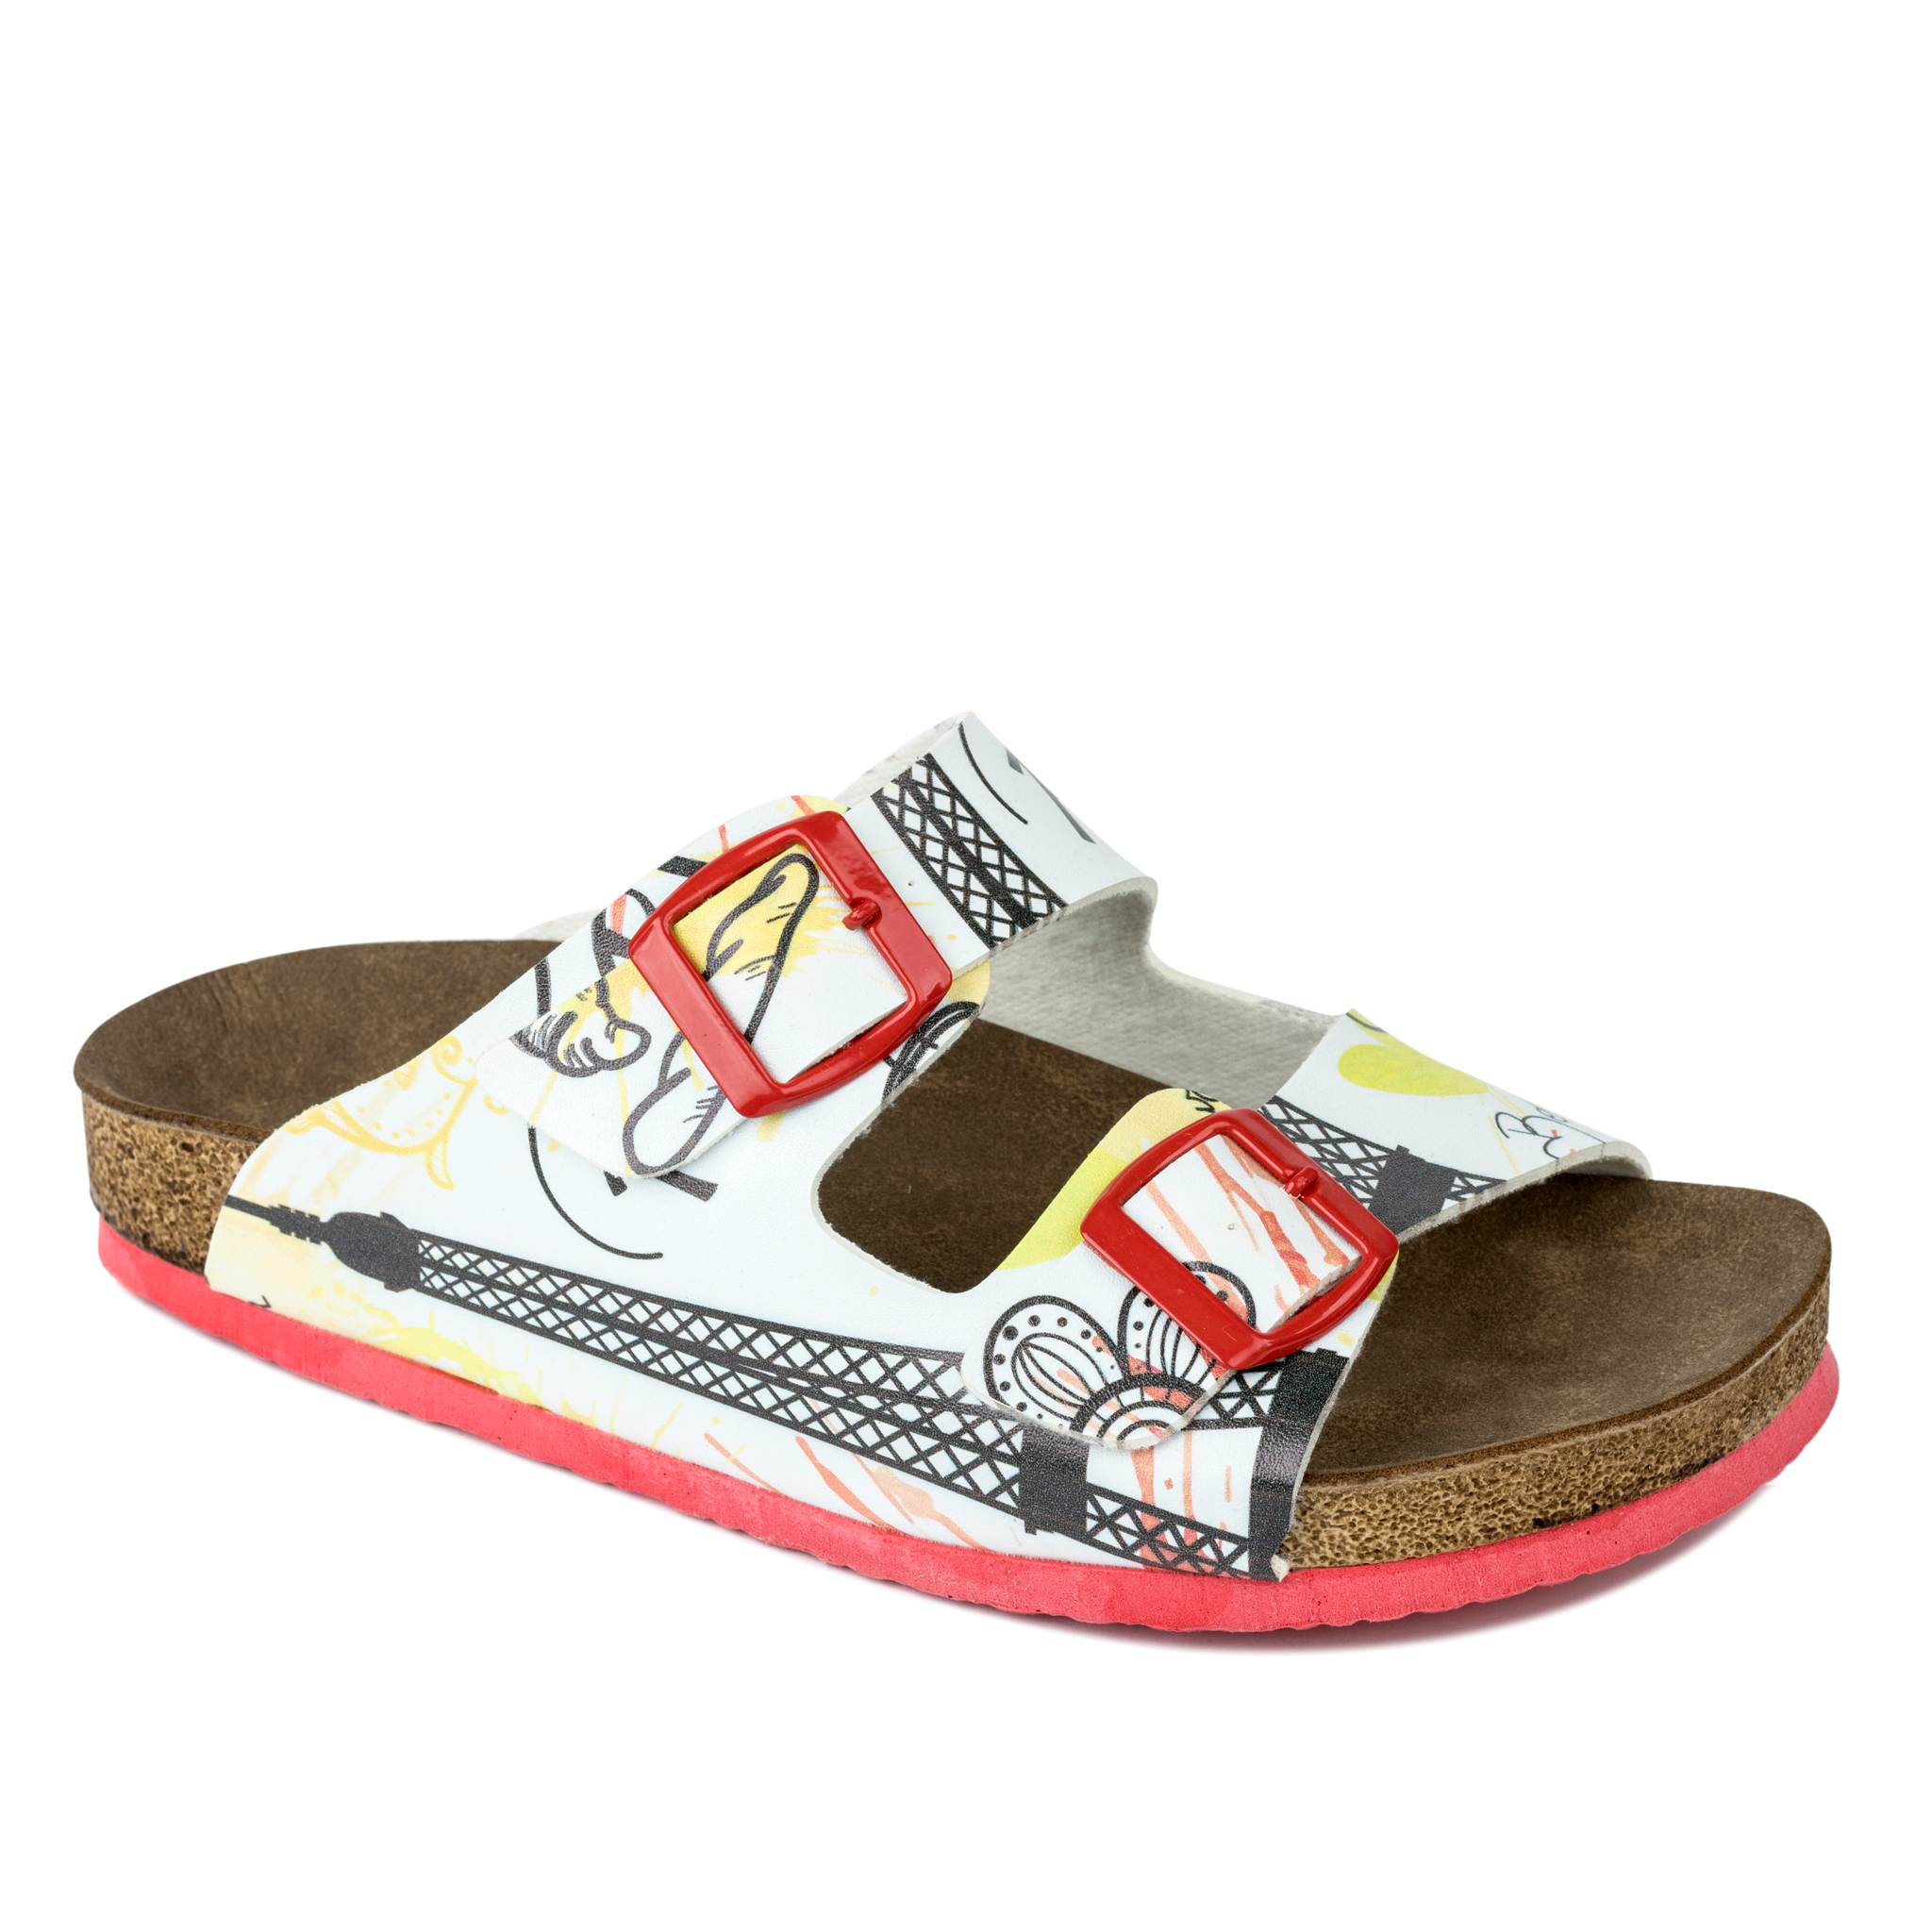 PARIS SLIPPERS WITH BELTS - WHITE/RED